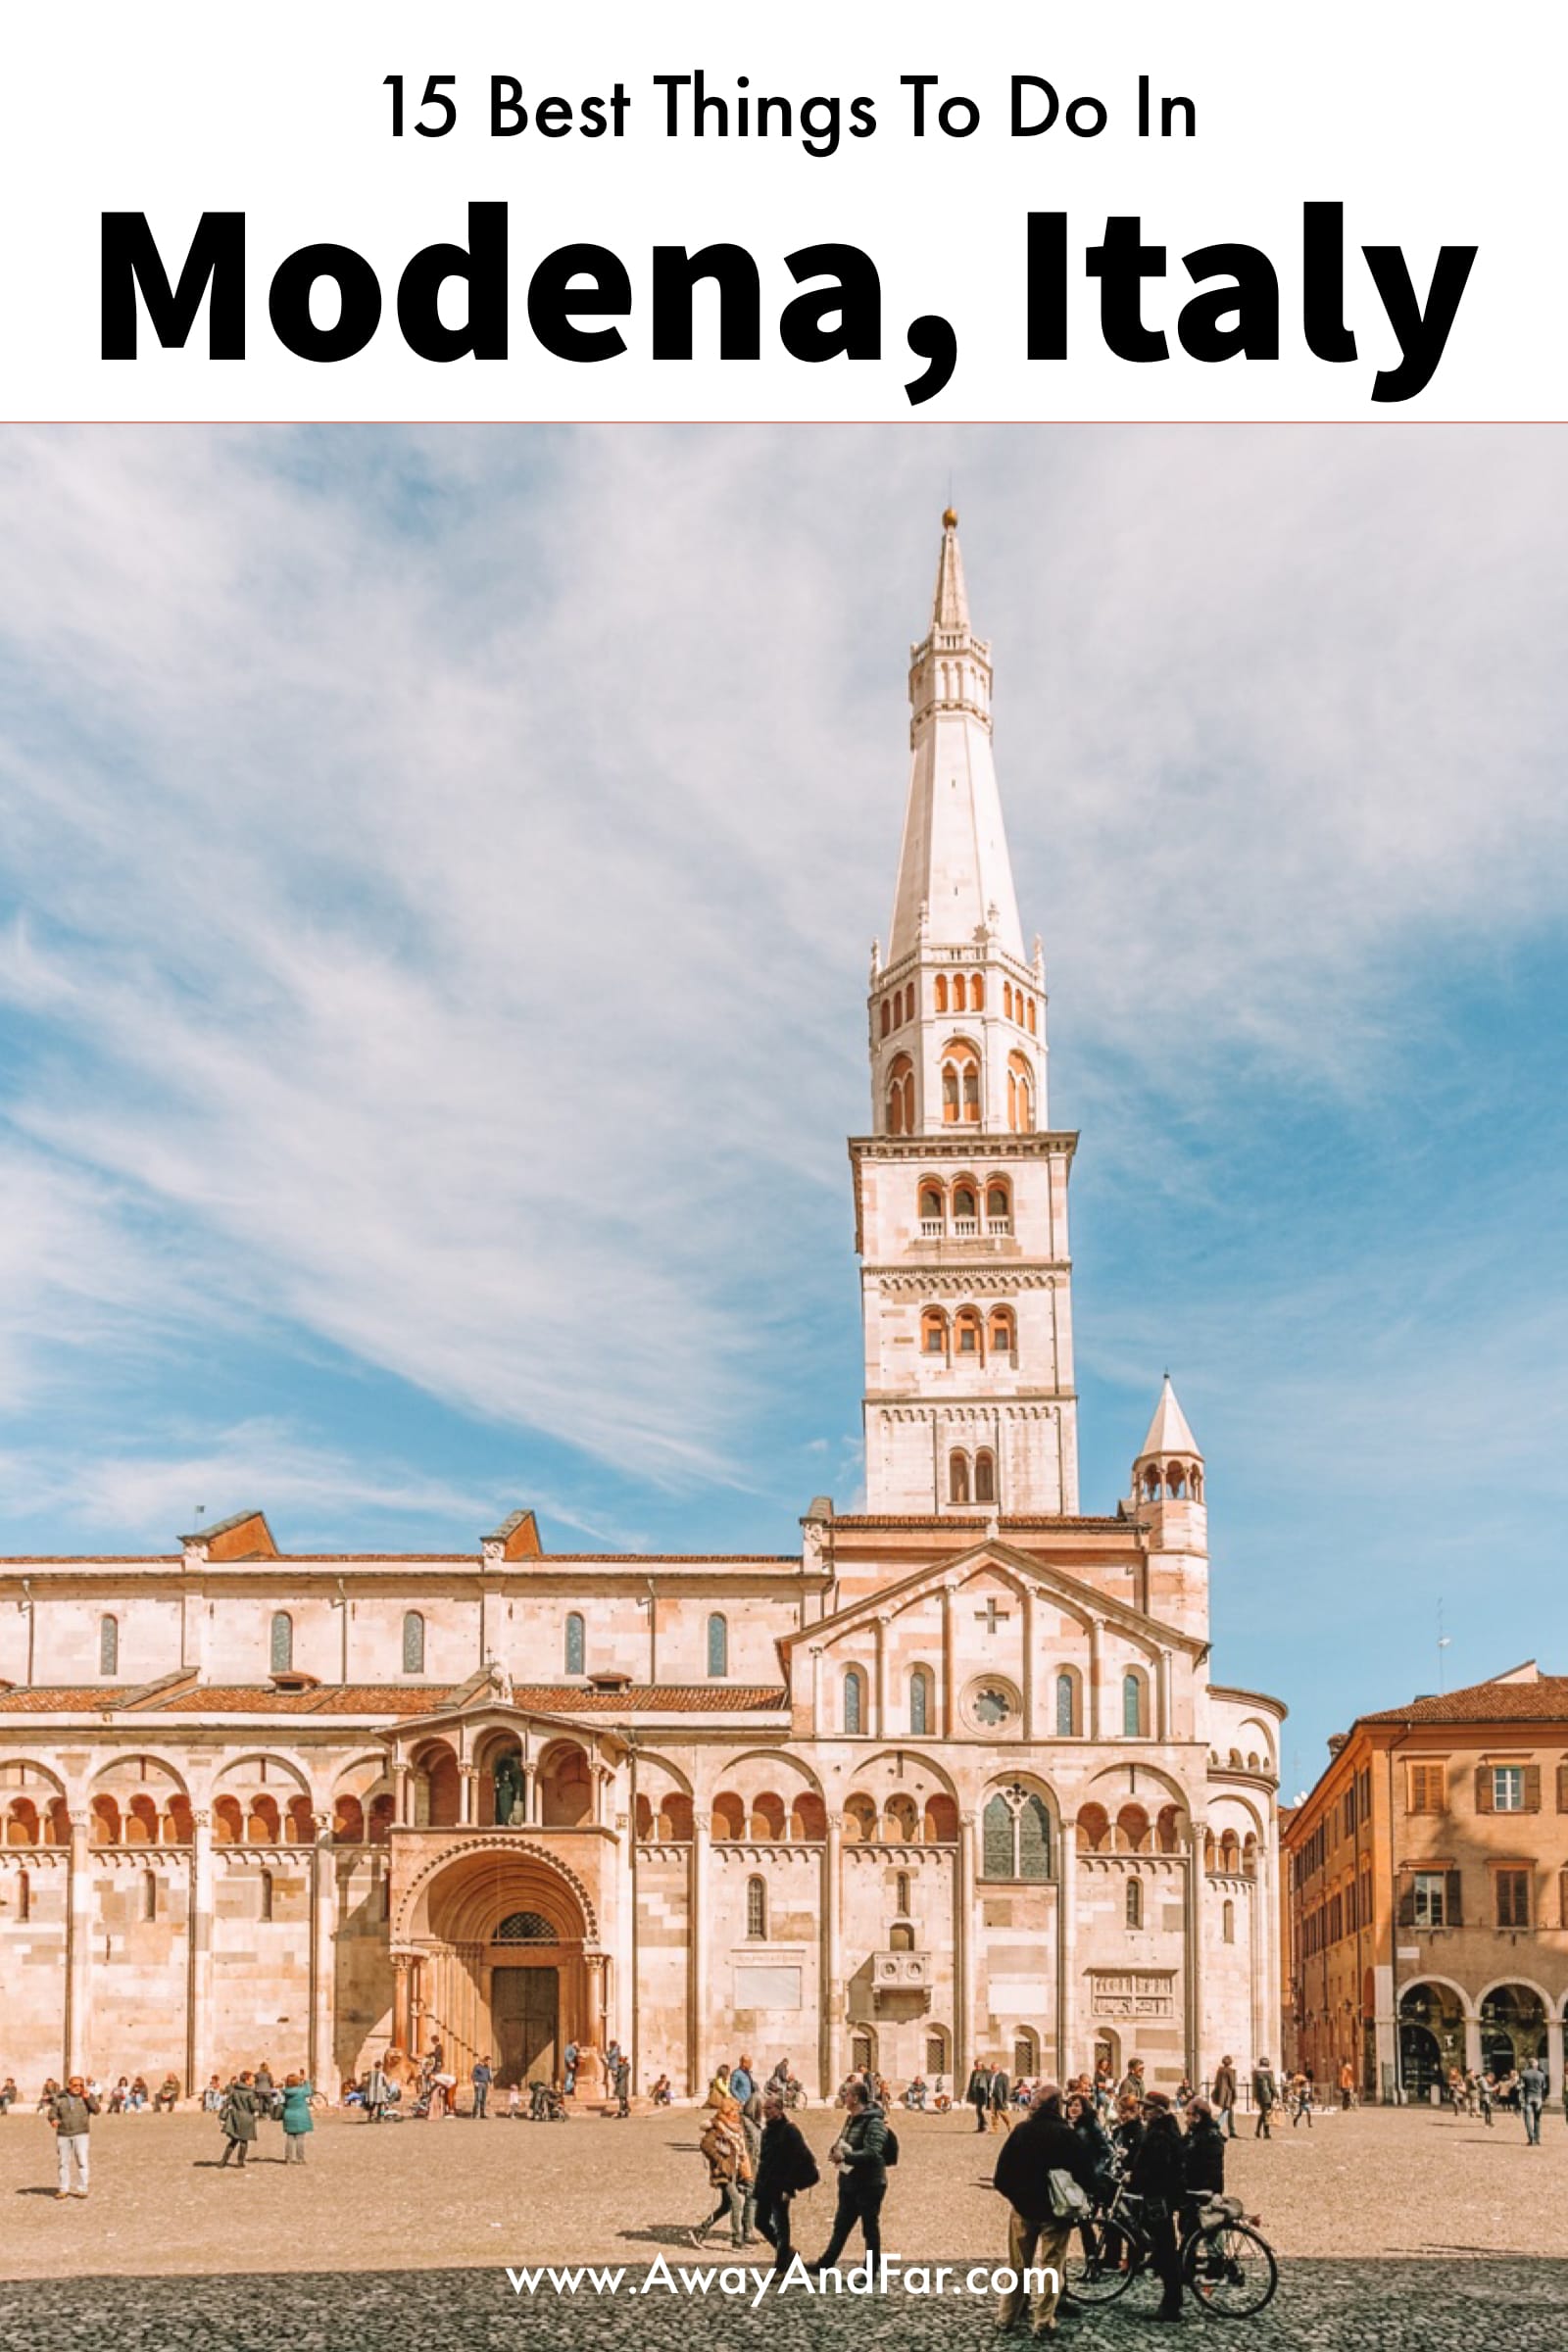 15 Best Things To Do In Modena, Italy (1)